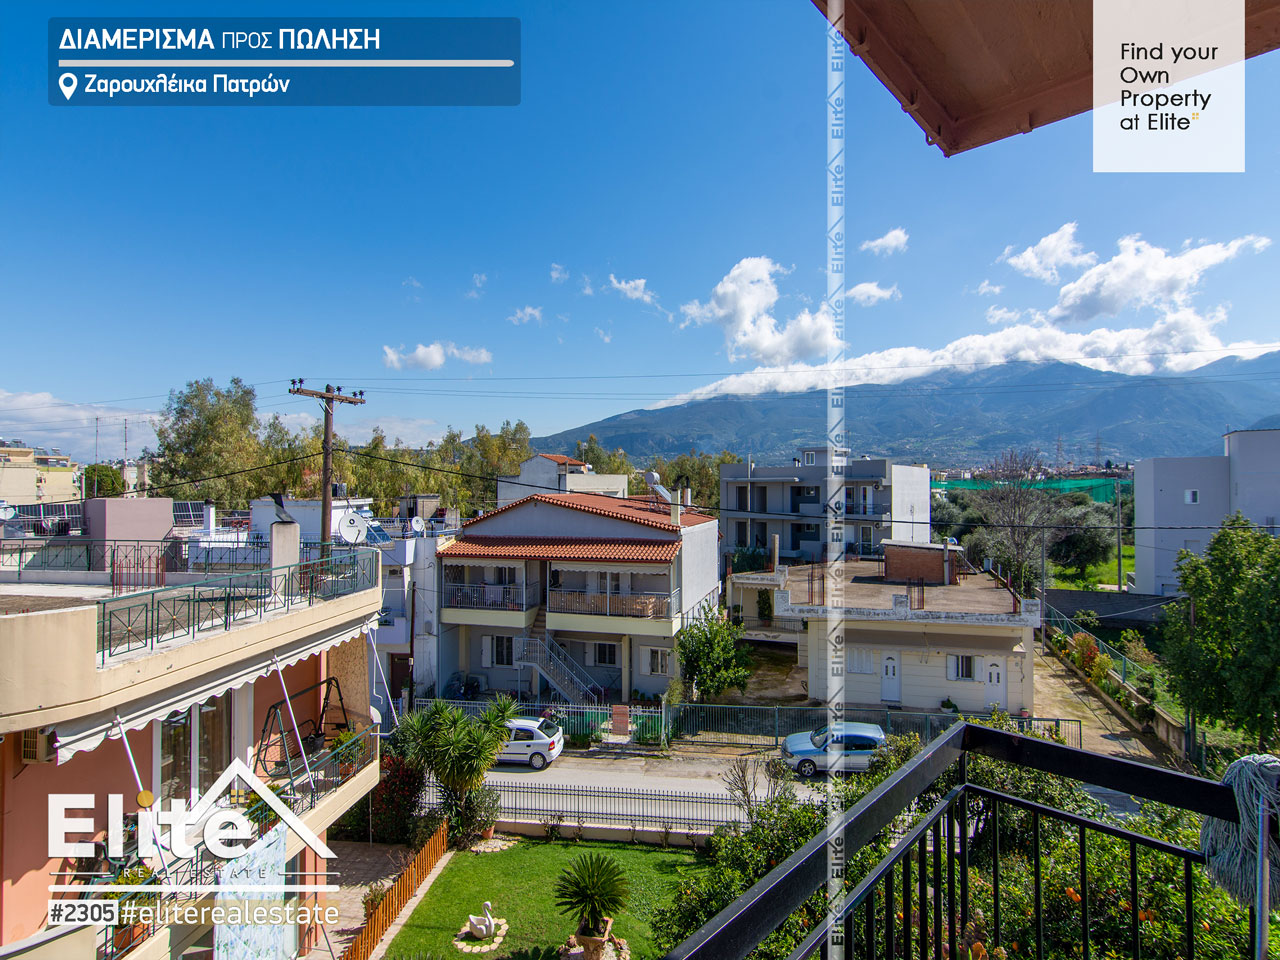 Sale two bedroom apartment for sale in Patras (Zarouchleika) #2305 | ELITE REAL ESTATE